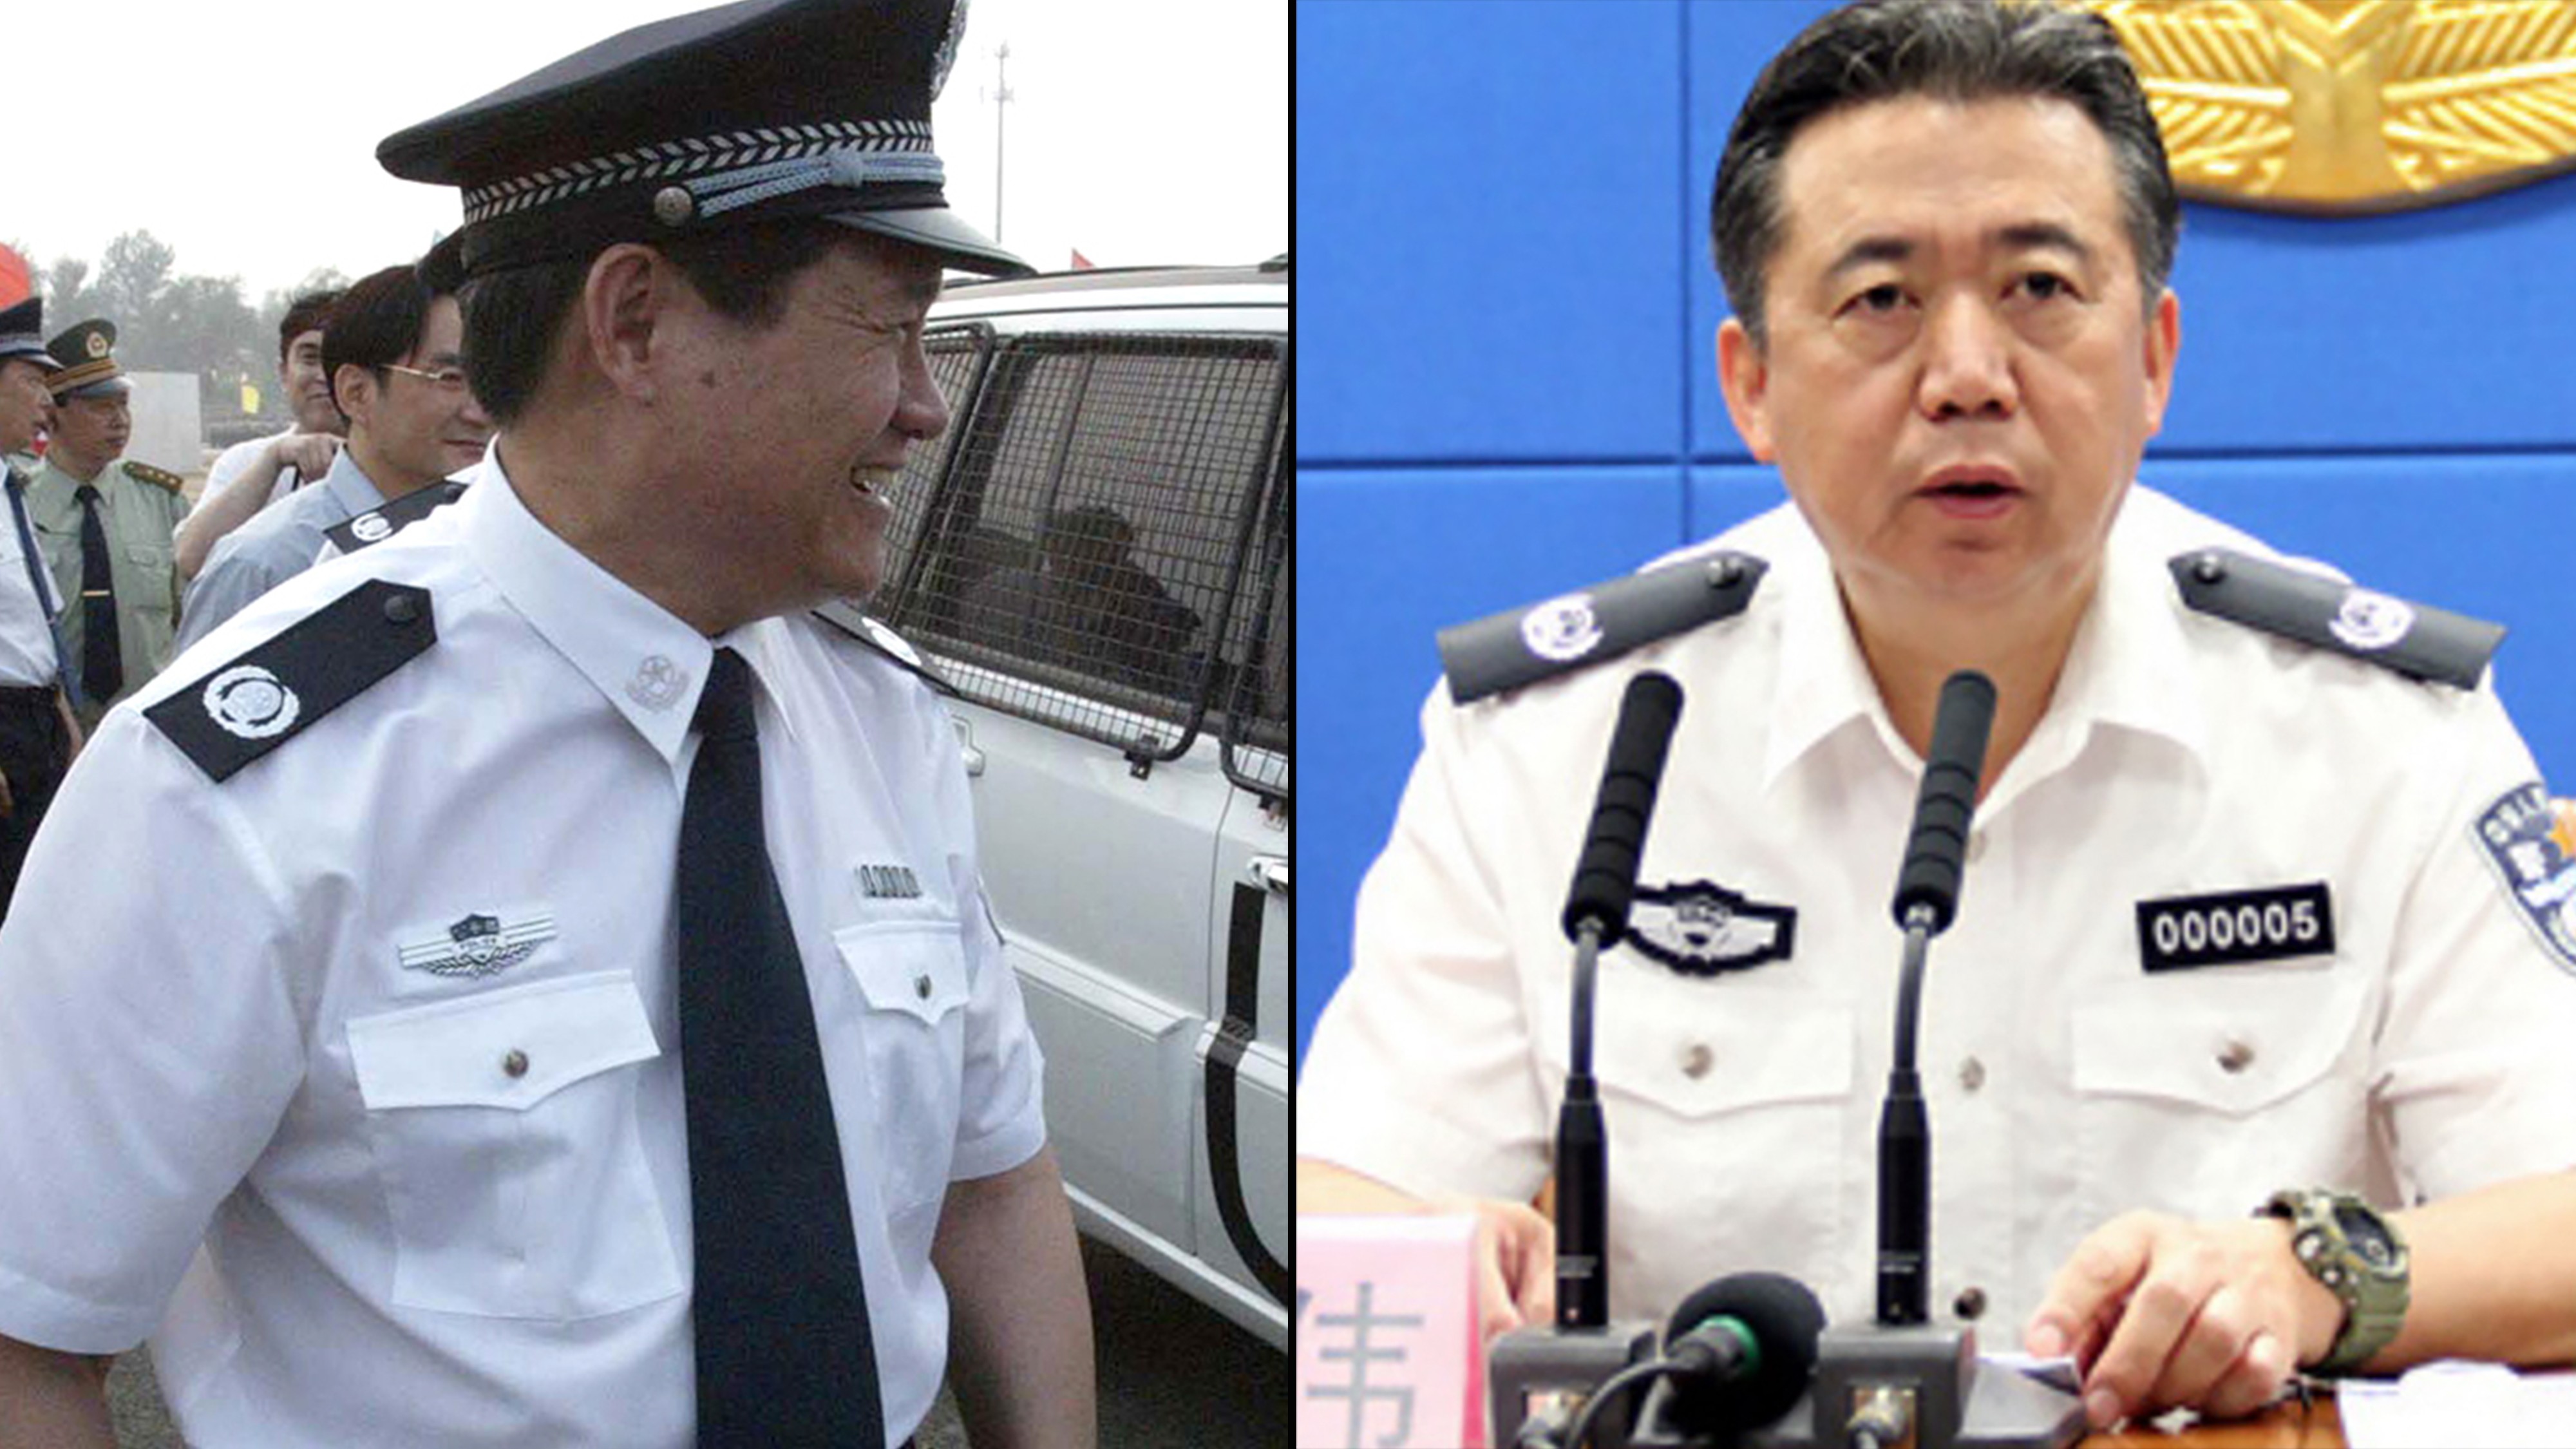 Zhou Yongkang (left) and Meng Hongwei. National police force leaders vowed to cleanse the “pernicious legacy” of Zhou, who has been jailed for life for corruption. Photos: Handout